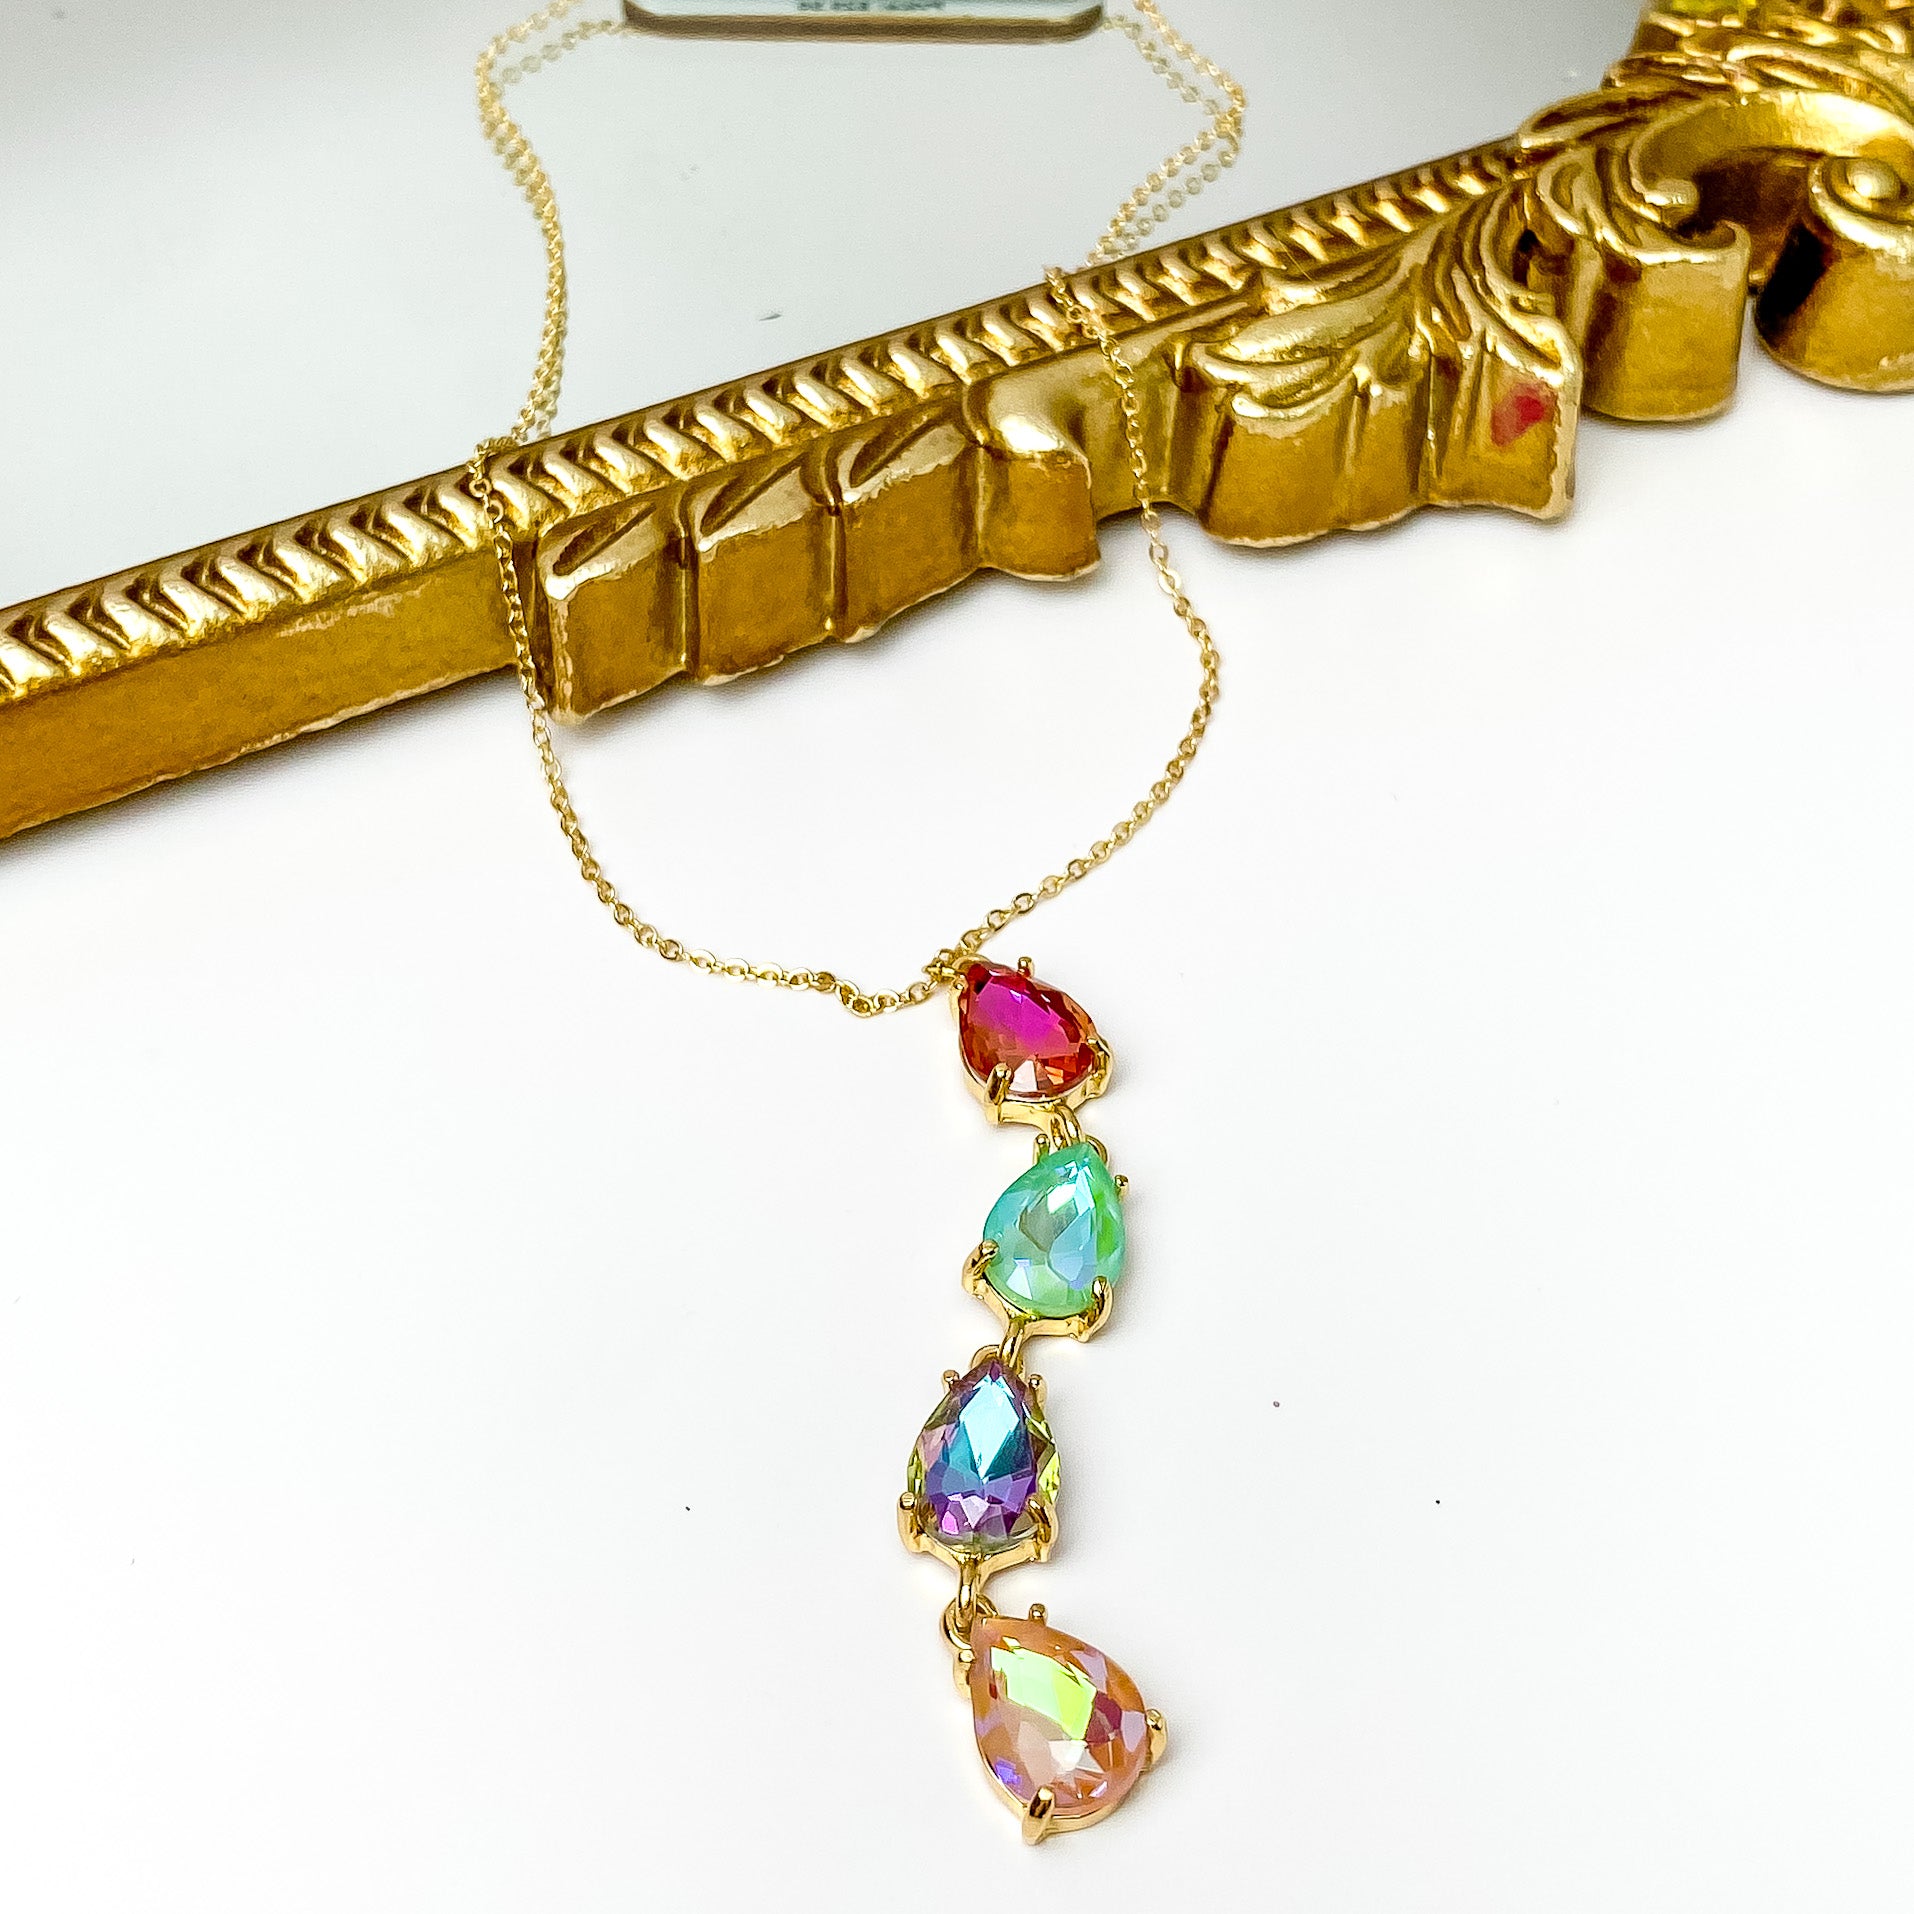 Gold chain necklace with a four crystal drop. This drop are teardrop crystals and include the colors pink, mint, purple, and light pink. This necklace is pictured partially laying on a gold mirror on a white background. 